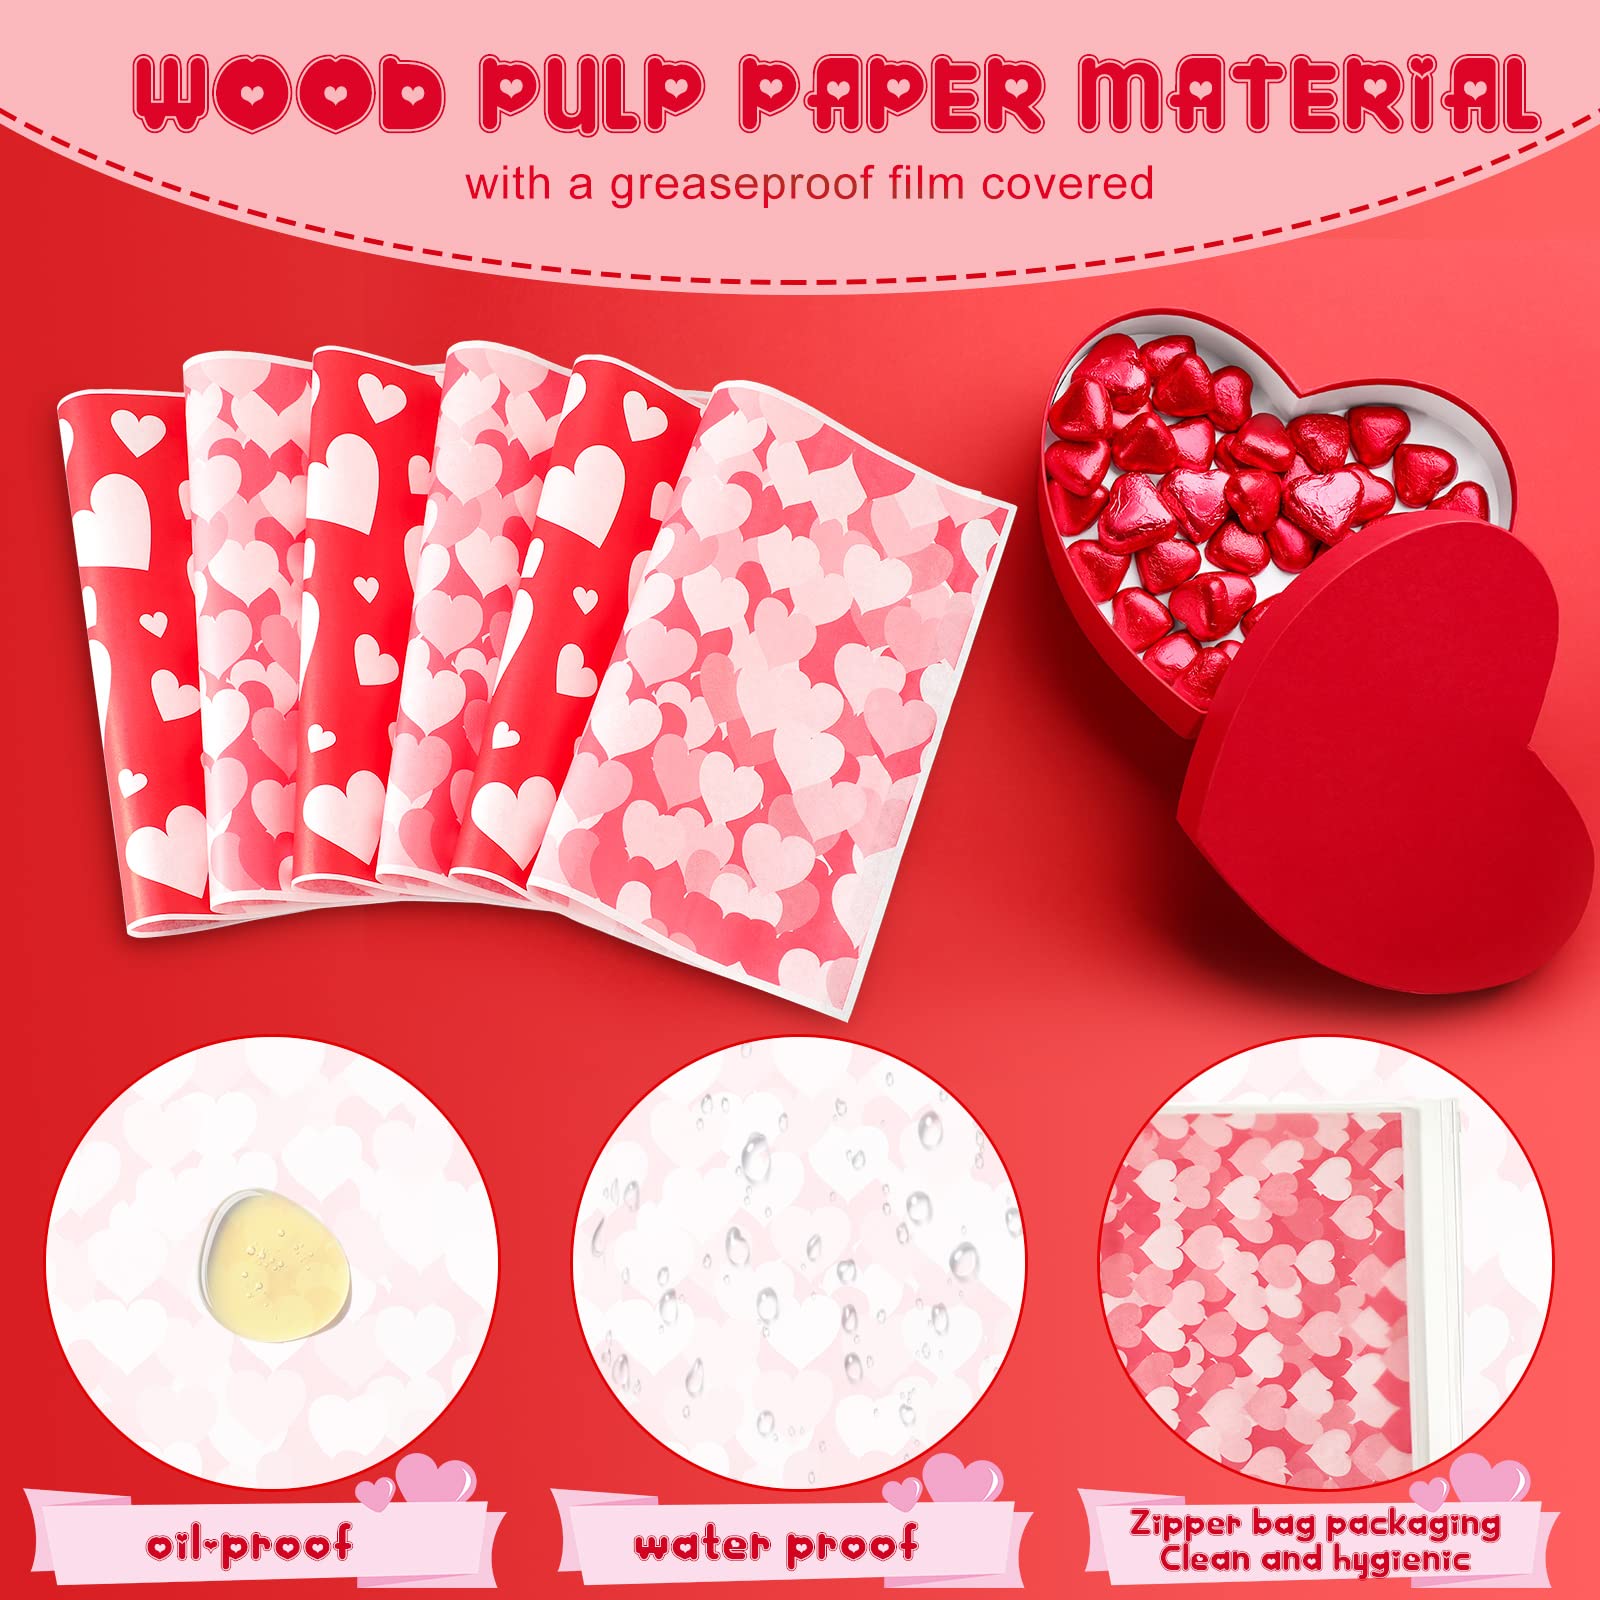 150 Pieces Wax Paper Valentine's Day Food Wrap Paper Heart Sandwich Wrapping Paper Greaseproof Wrapping Paper for Valentine's Day Chocolate Candy Cookies Baking Food Basket Liner Party Supplies